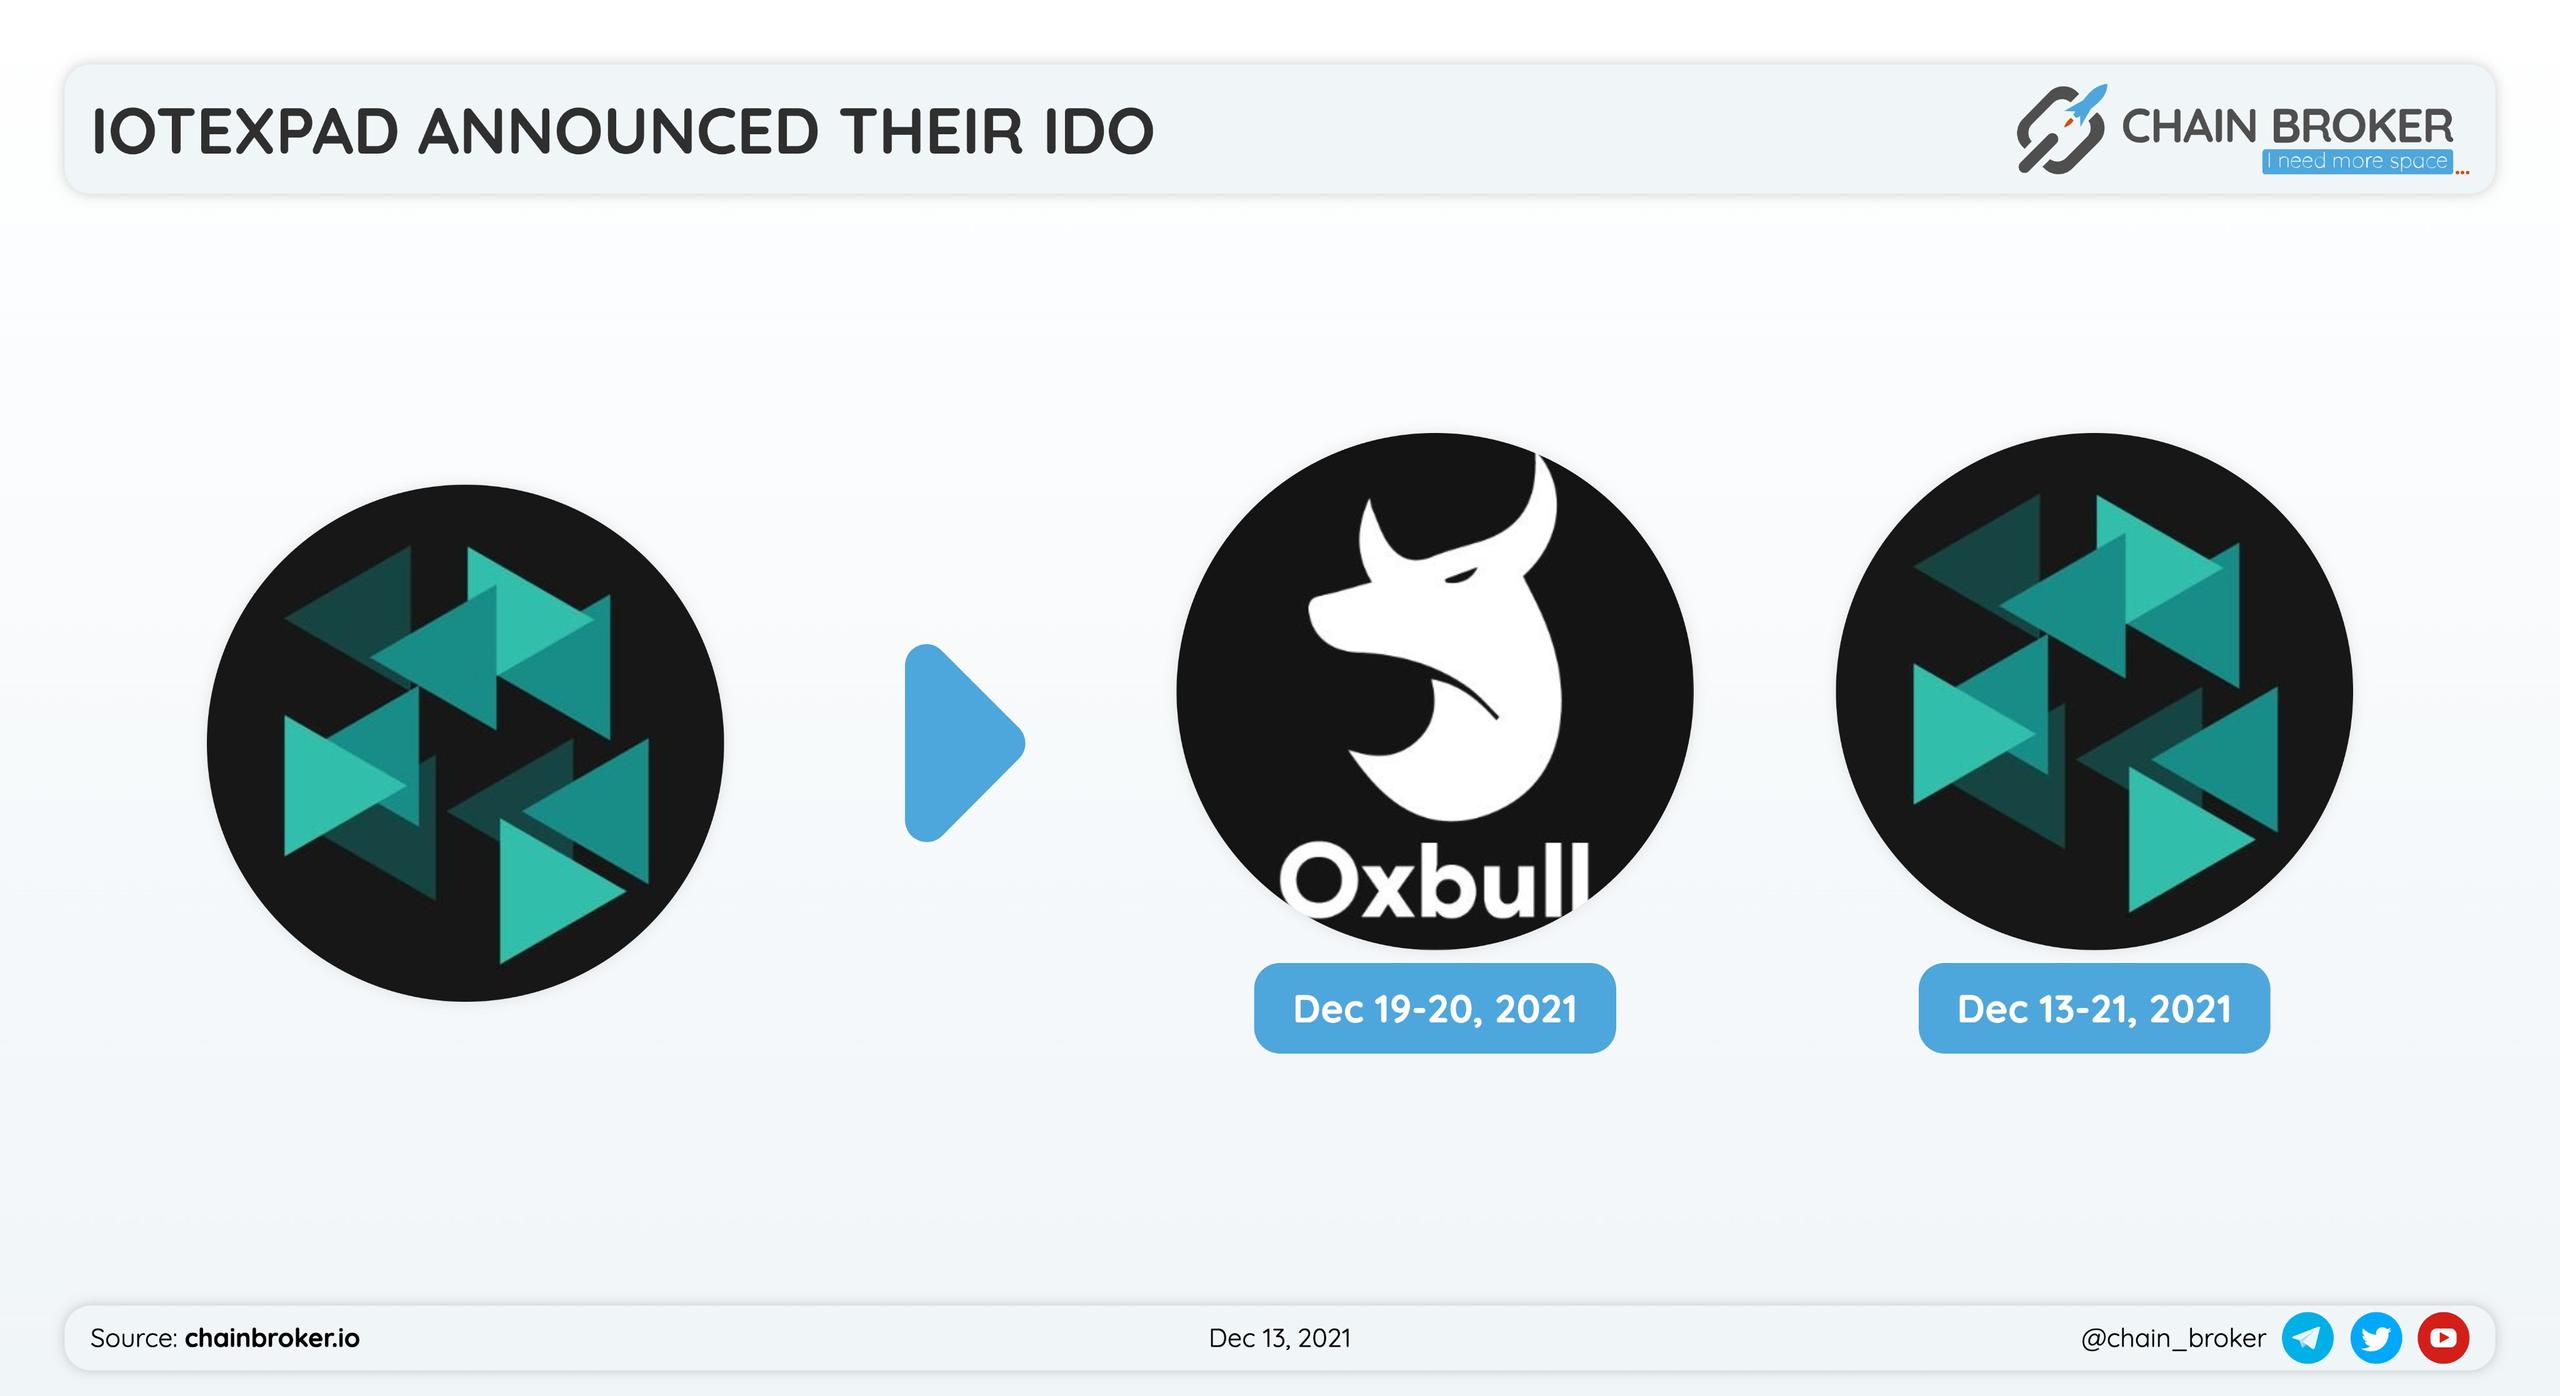 IotexPad chose to split the Public sale between the self-IDO and Oxbull.